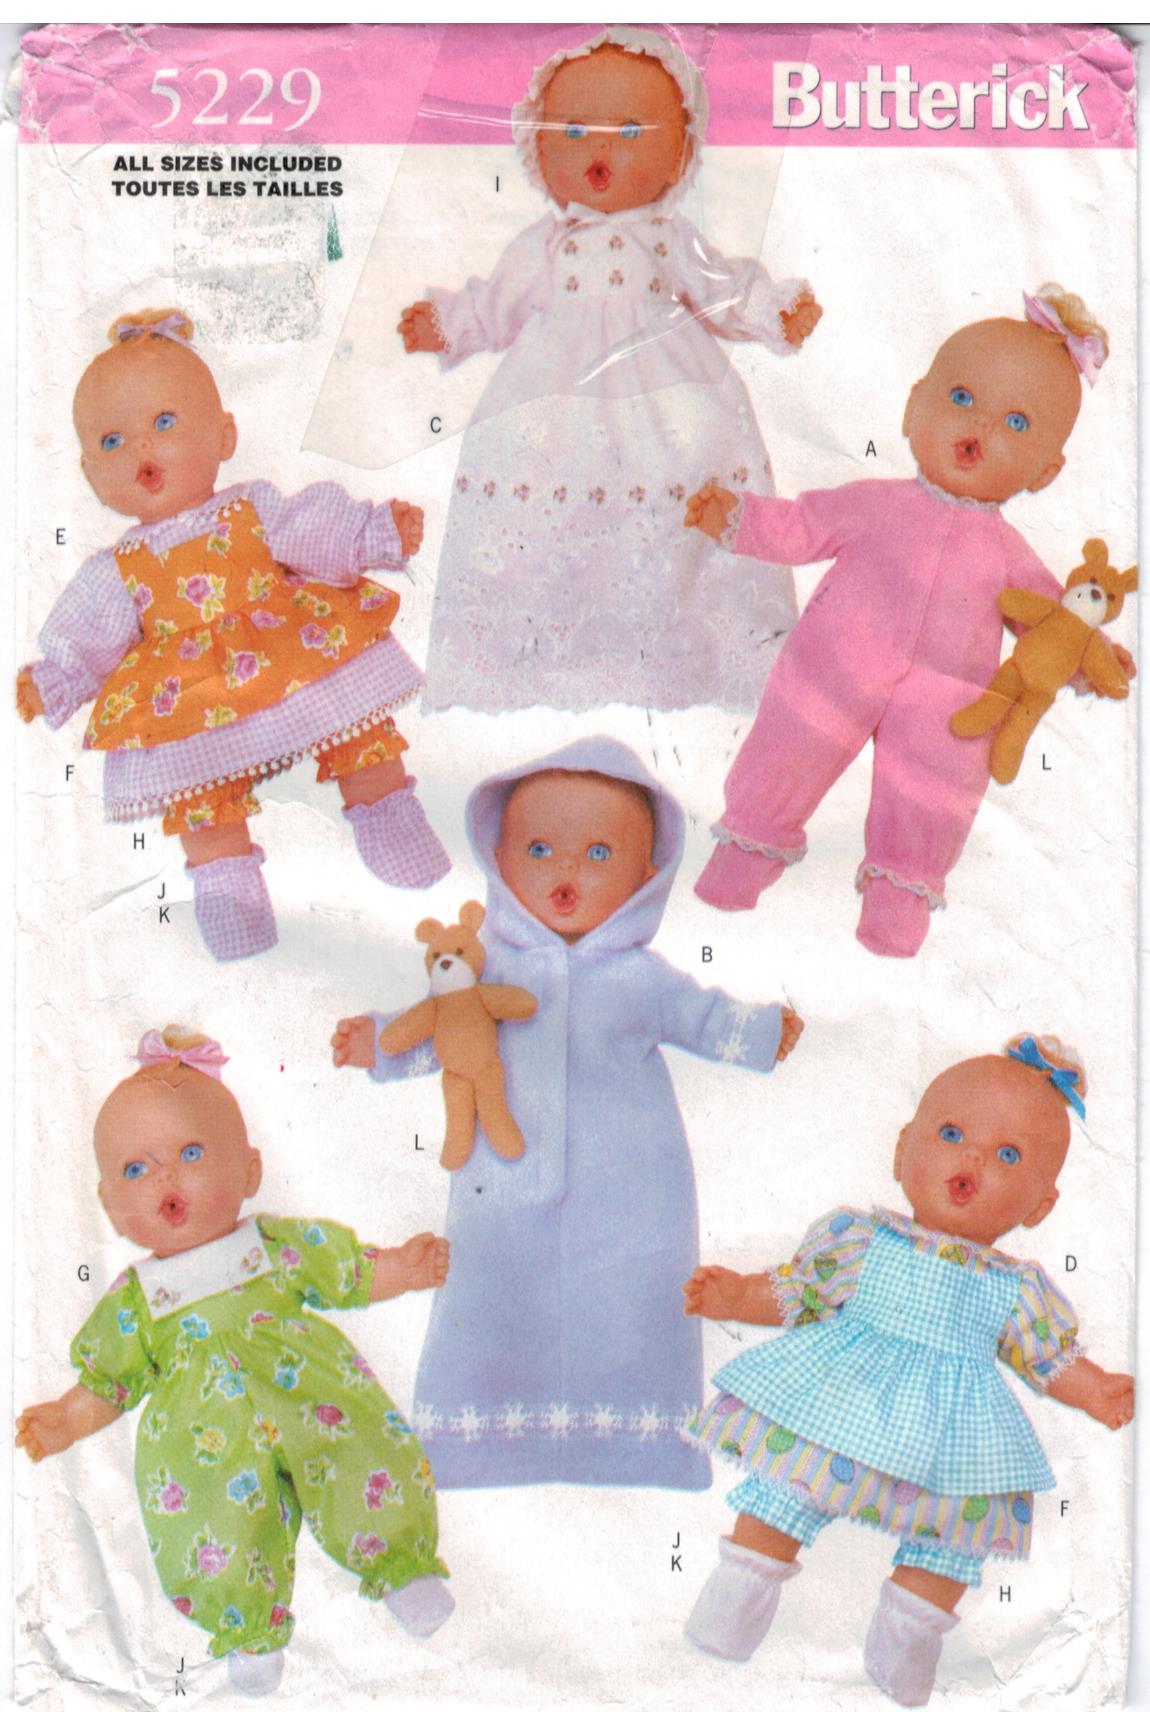 14 baby doll clothes